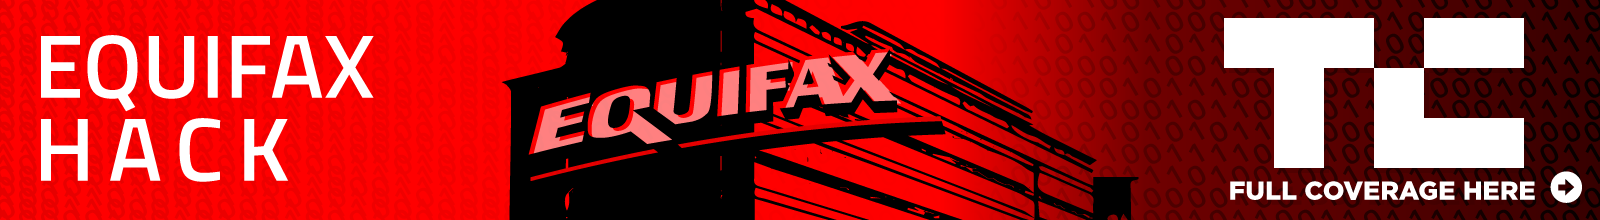 Senator says Equifax should offer customers free credit security freezes